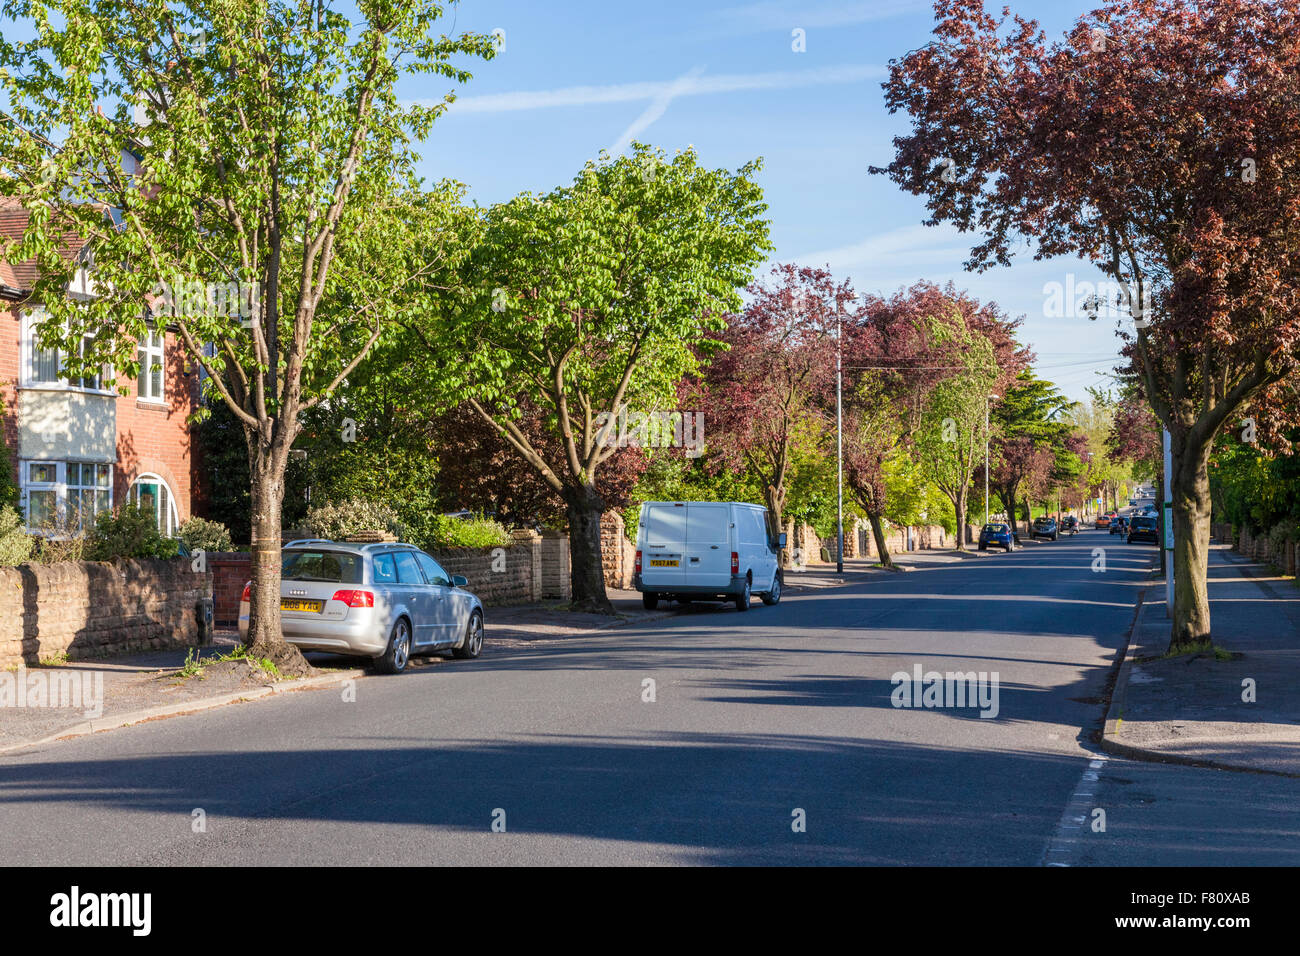 A variety of trees in Spring on a residential tree-lined road, West Bridgford, Nottinghamshire, England, UK Stock Photo